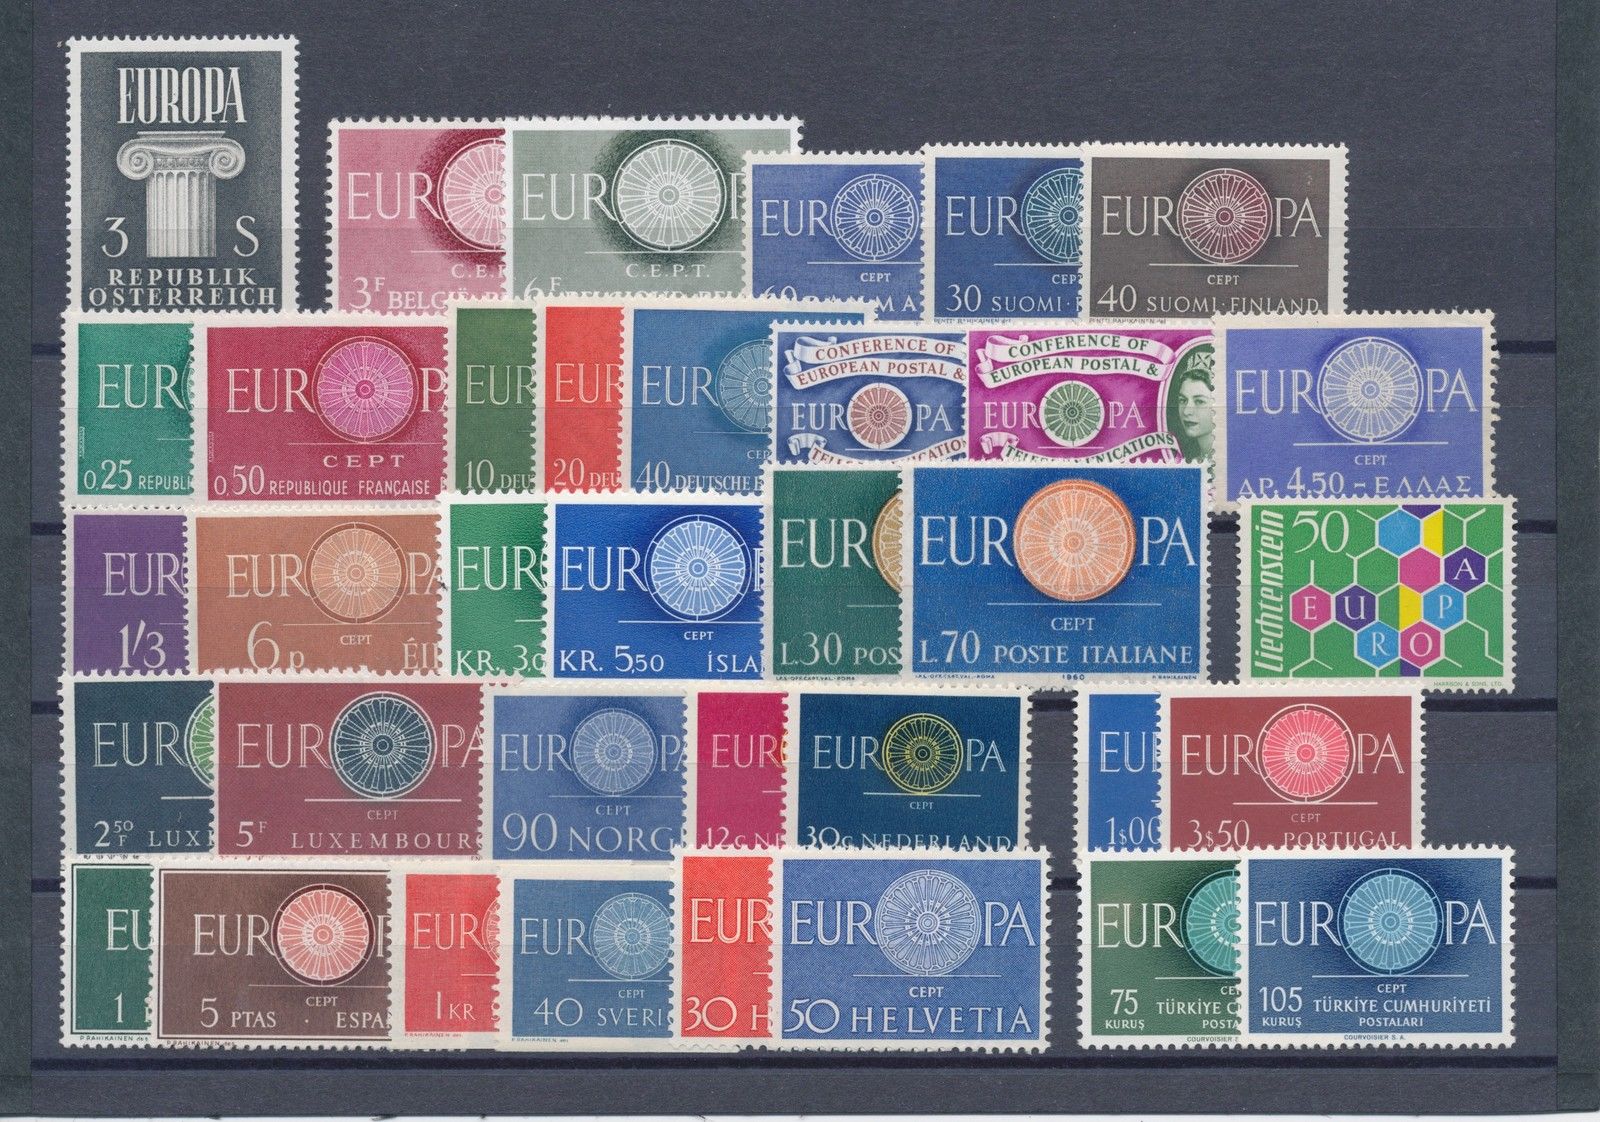 MNH ** - CPT15 Germania EUROPA C.E.P.T MNH **  Varie Serie Complete 